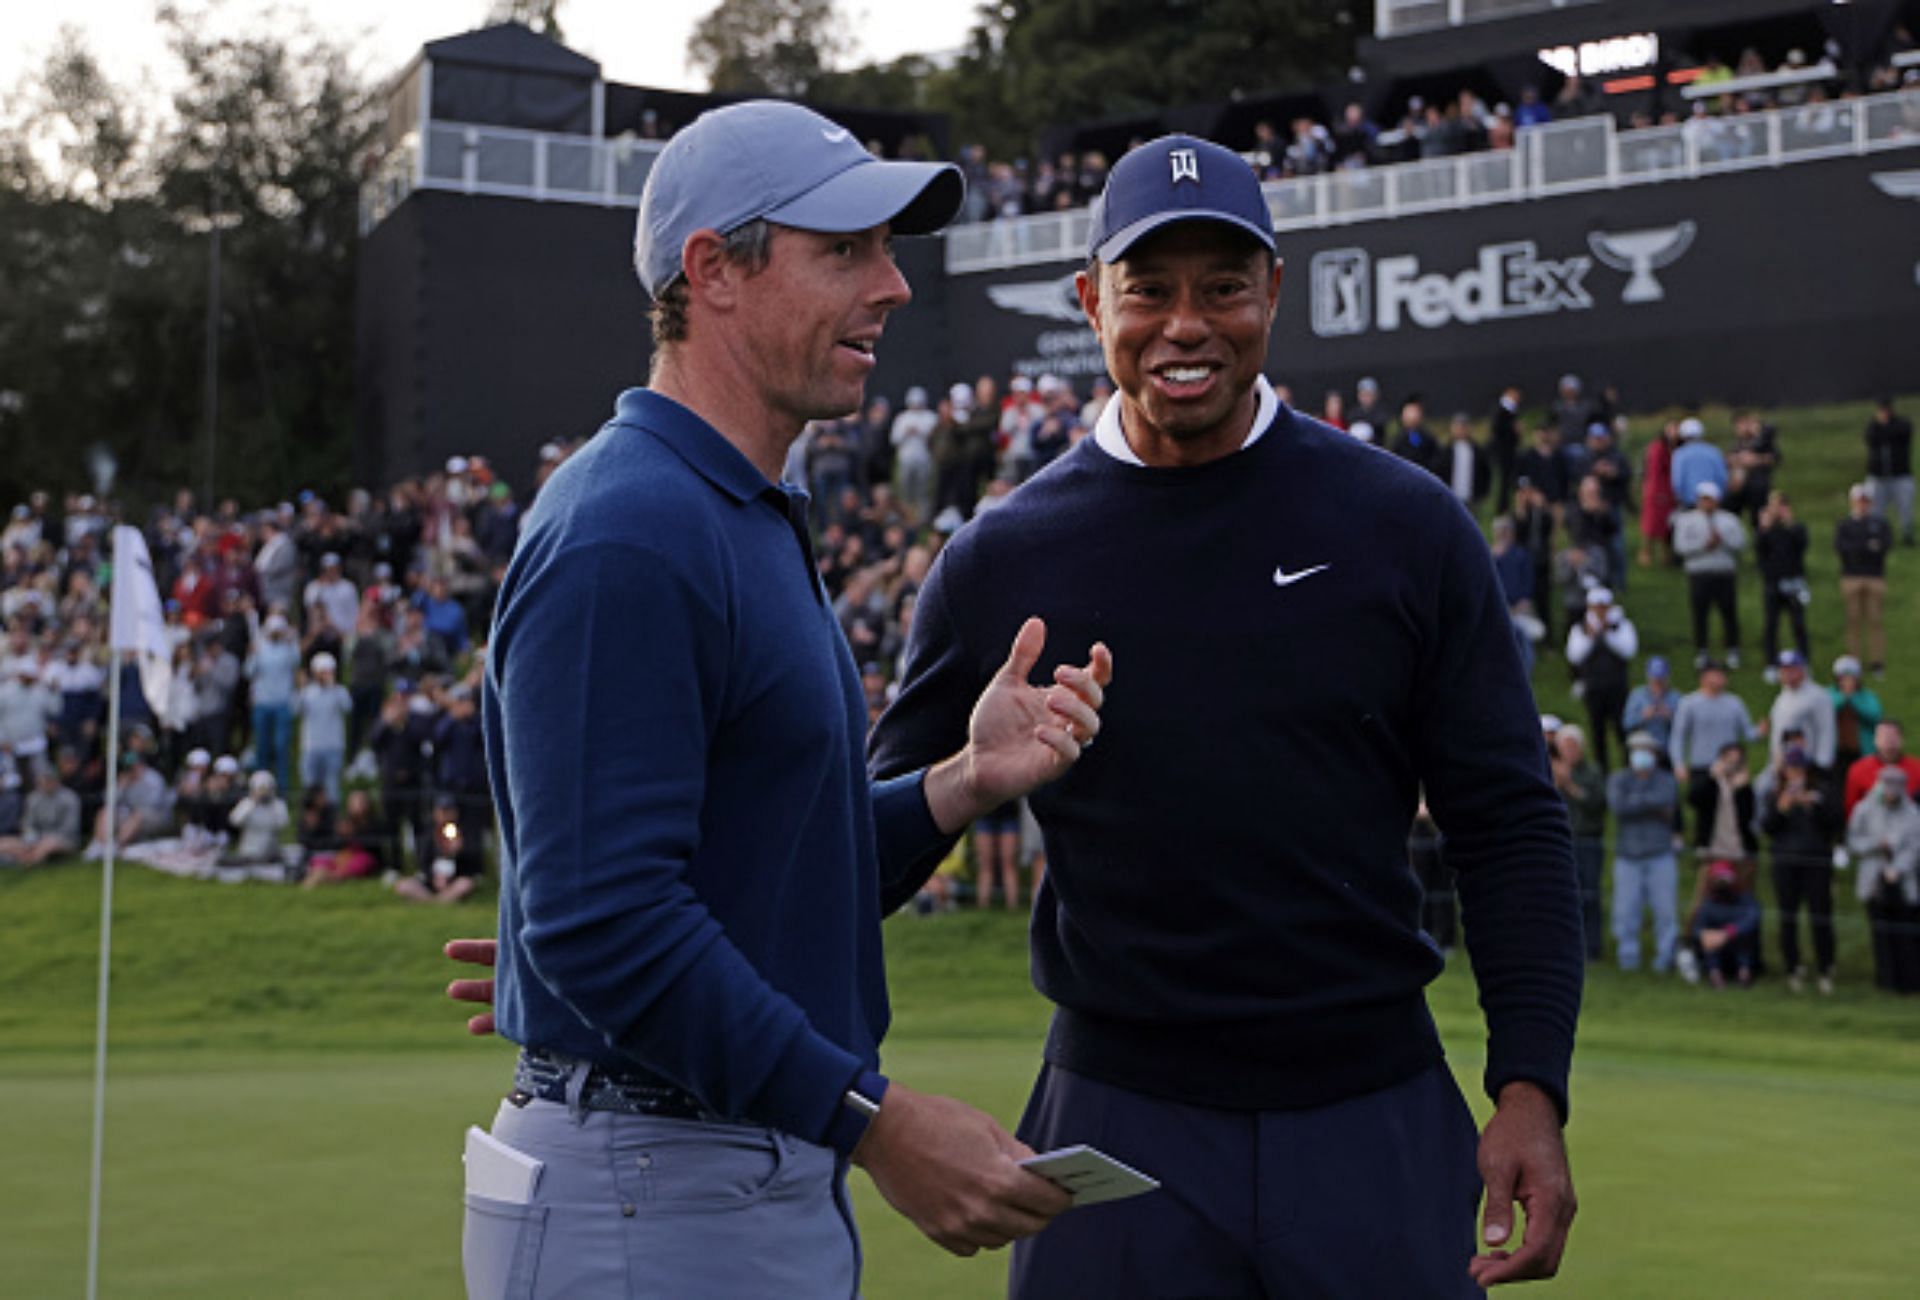 Rory McIlroy and Tiger Woods will be hosting and playin at the TGL Golf league (Image via Getty).